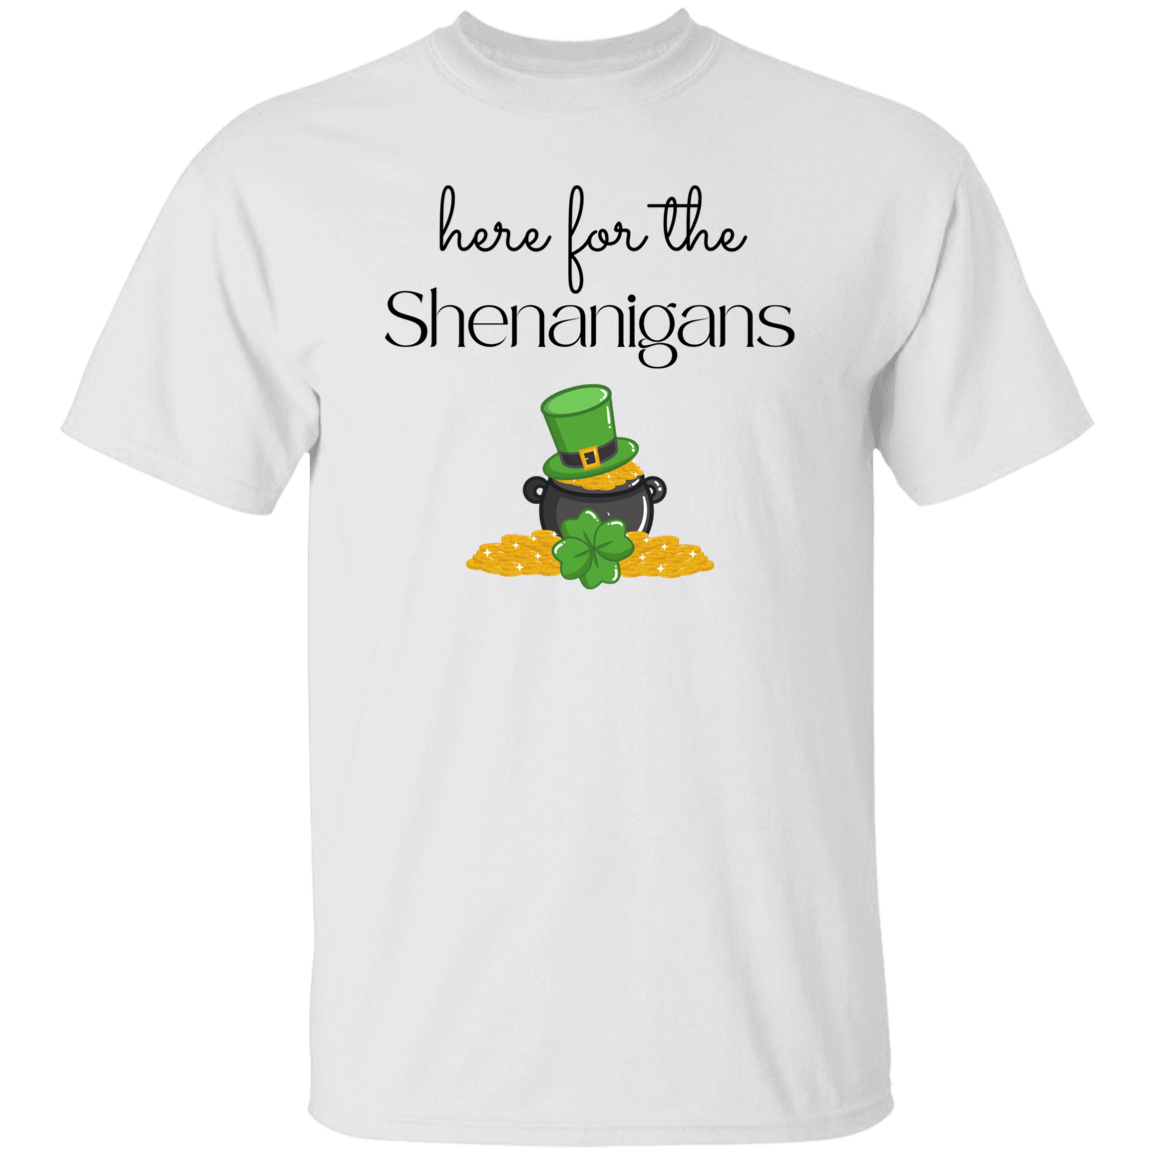 Here for the Shenanigans T-Shirt